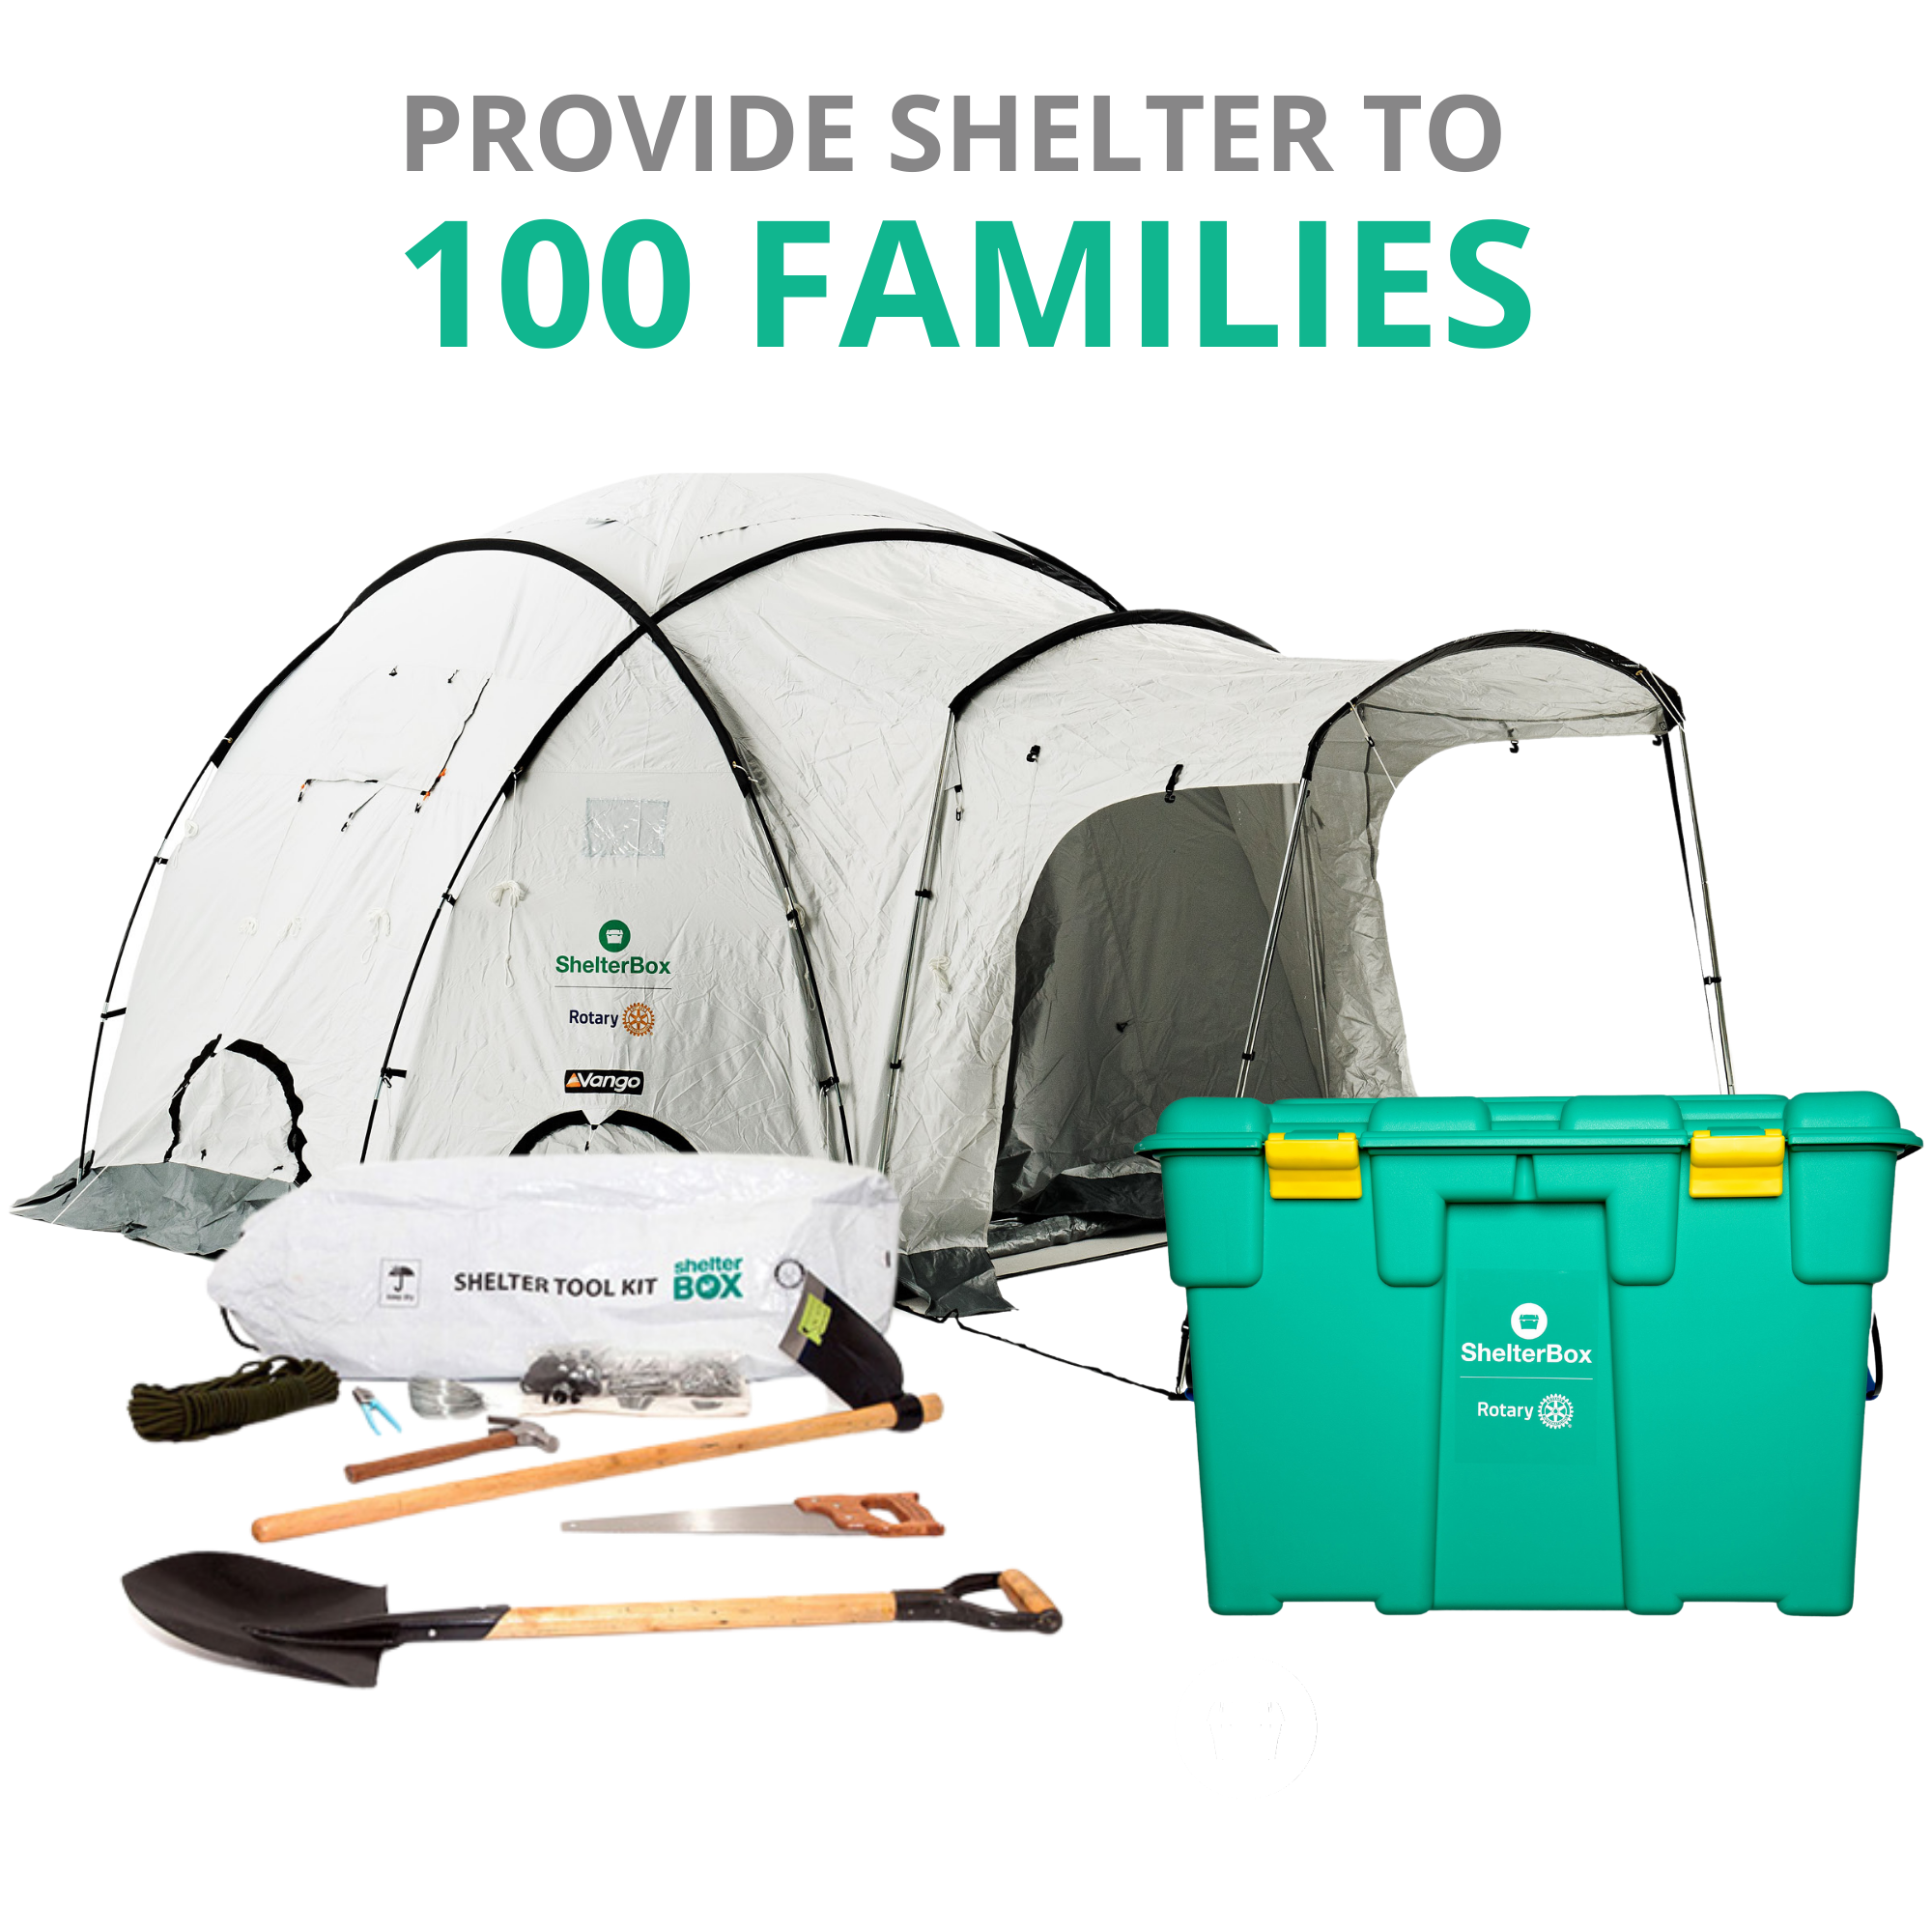 Provide Shelter to 100 families